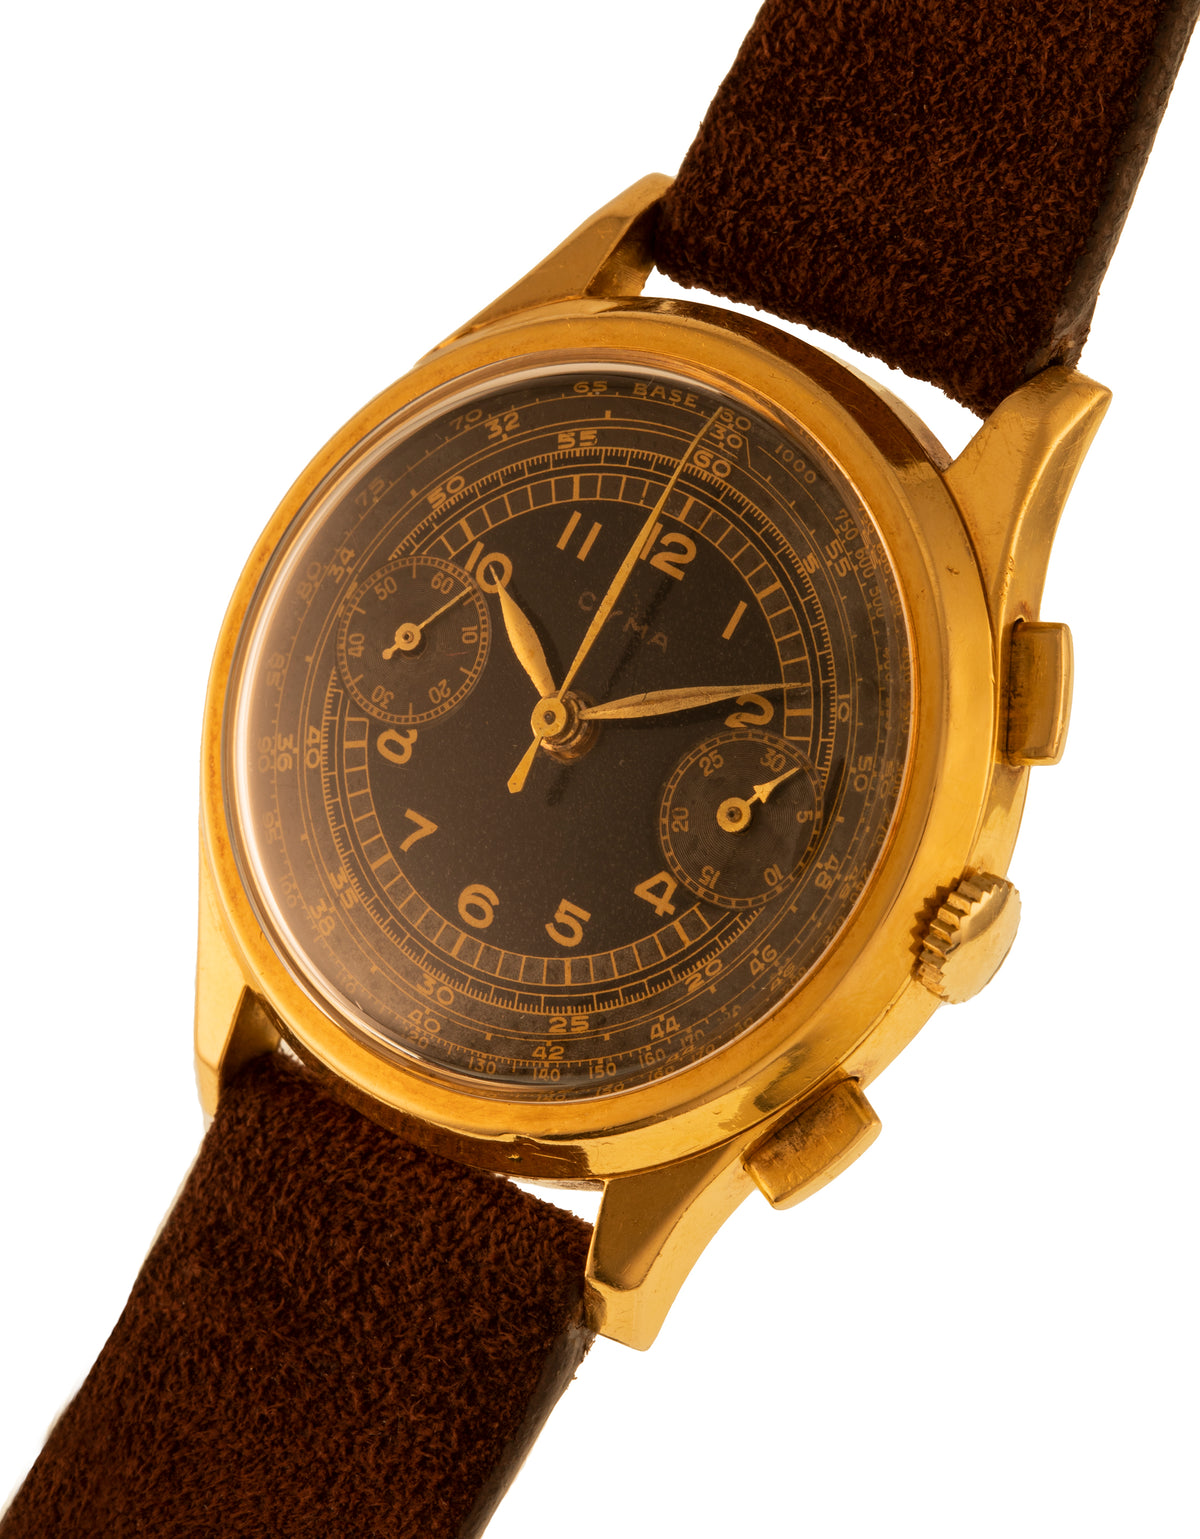 Cyma Chronograph black dial and gold case